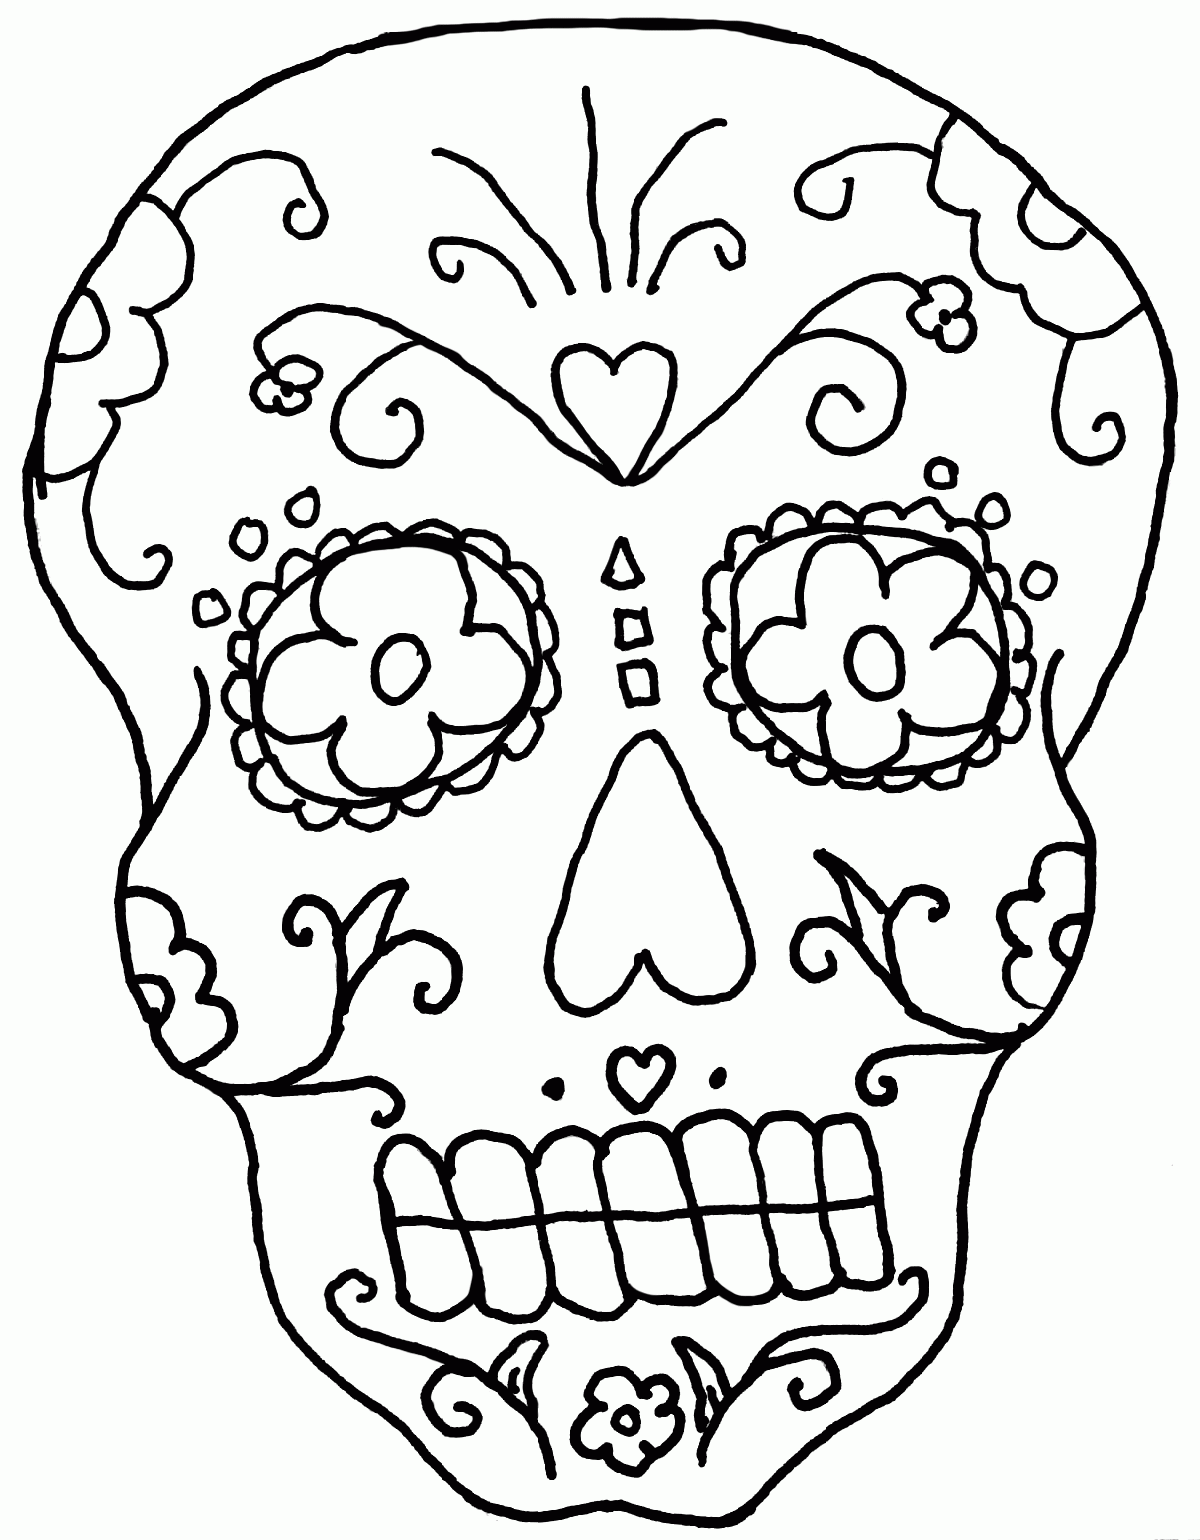 Coloring Pages For The Day Of The Dead Skulls - Coloring